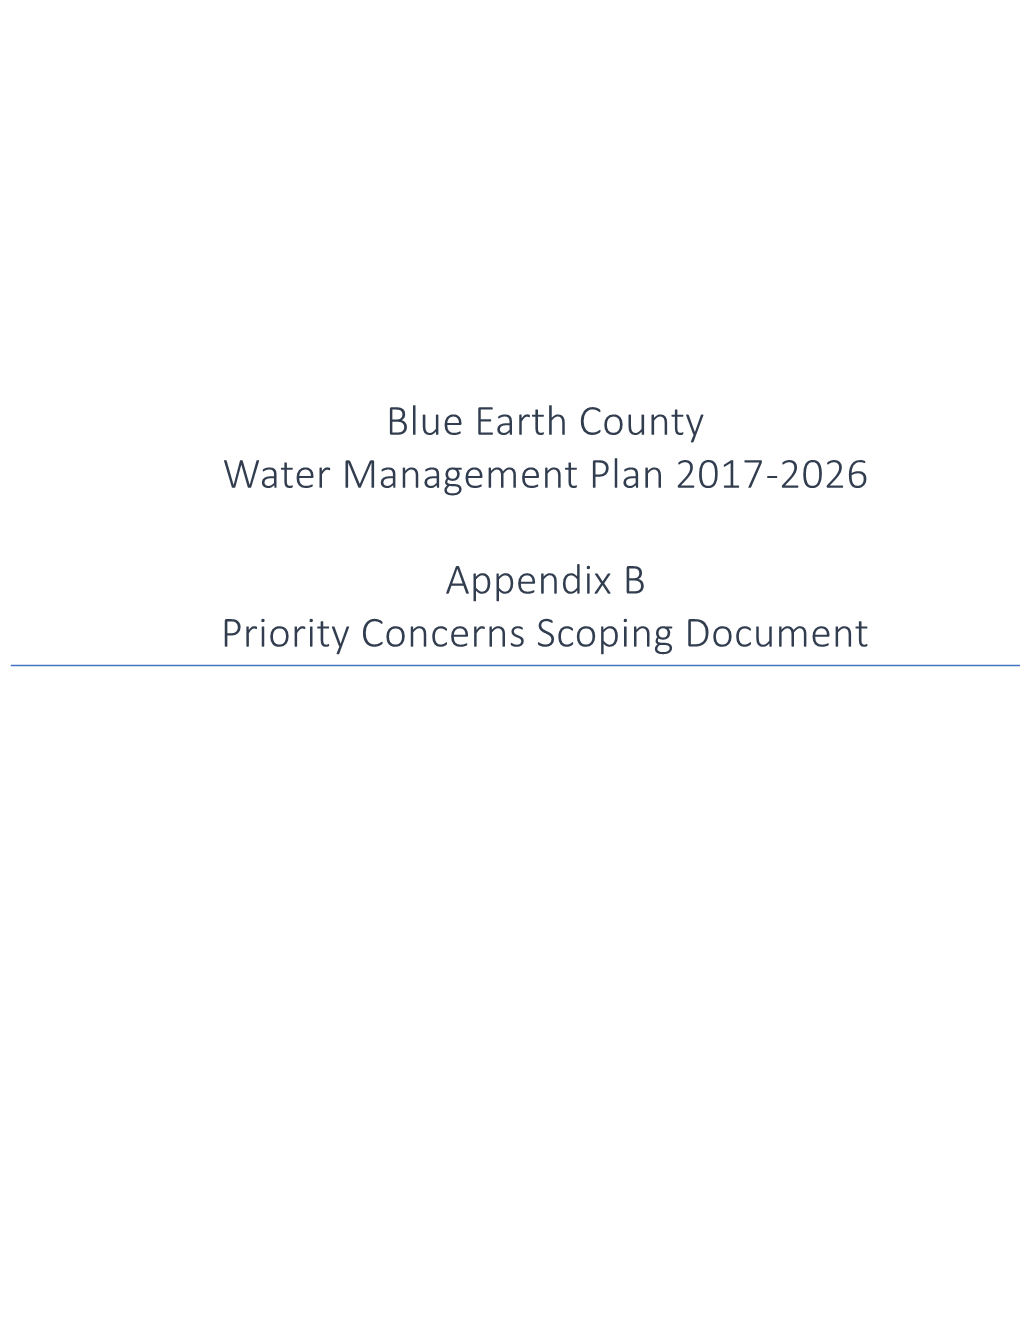 Blue Earth County Water Management Plan 2017-2026 Appendix B